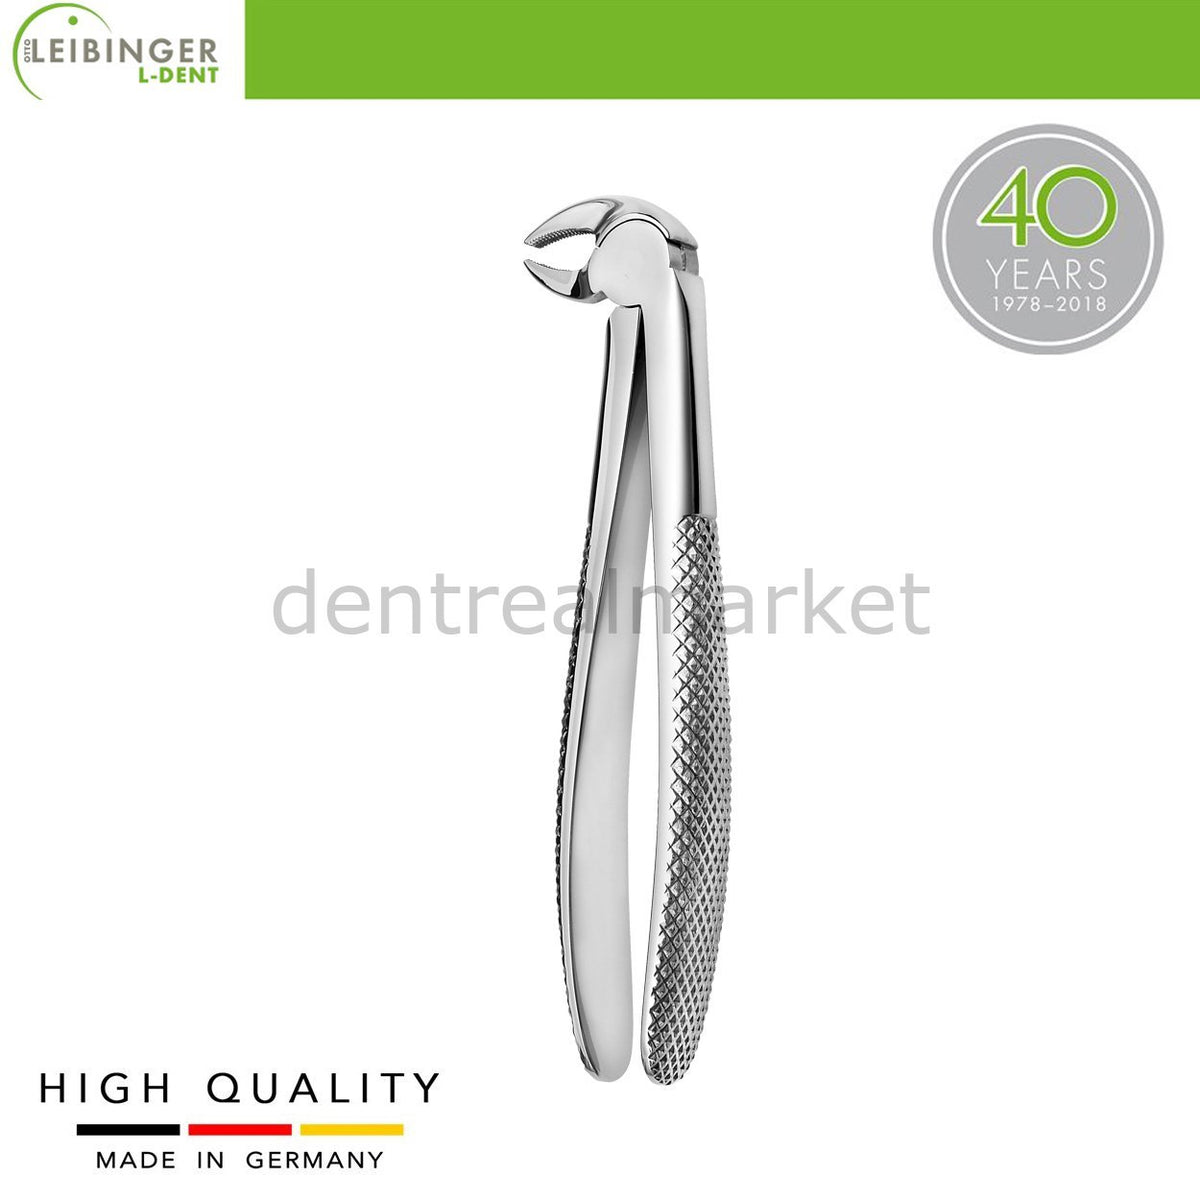 DentrealStore - Leibinger Adult Extracting Forceps 13 - Forceps for Lower Stem and Bicuspids